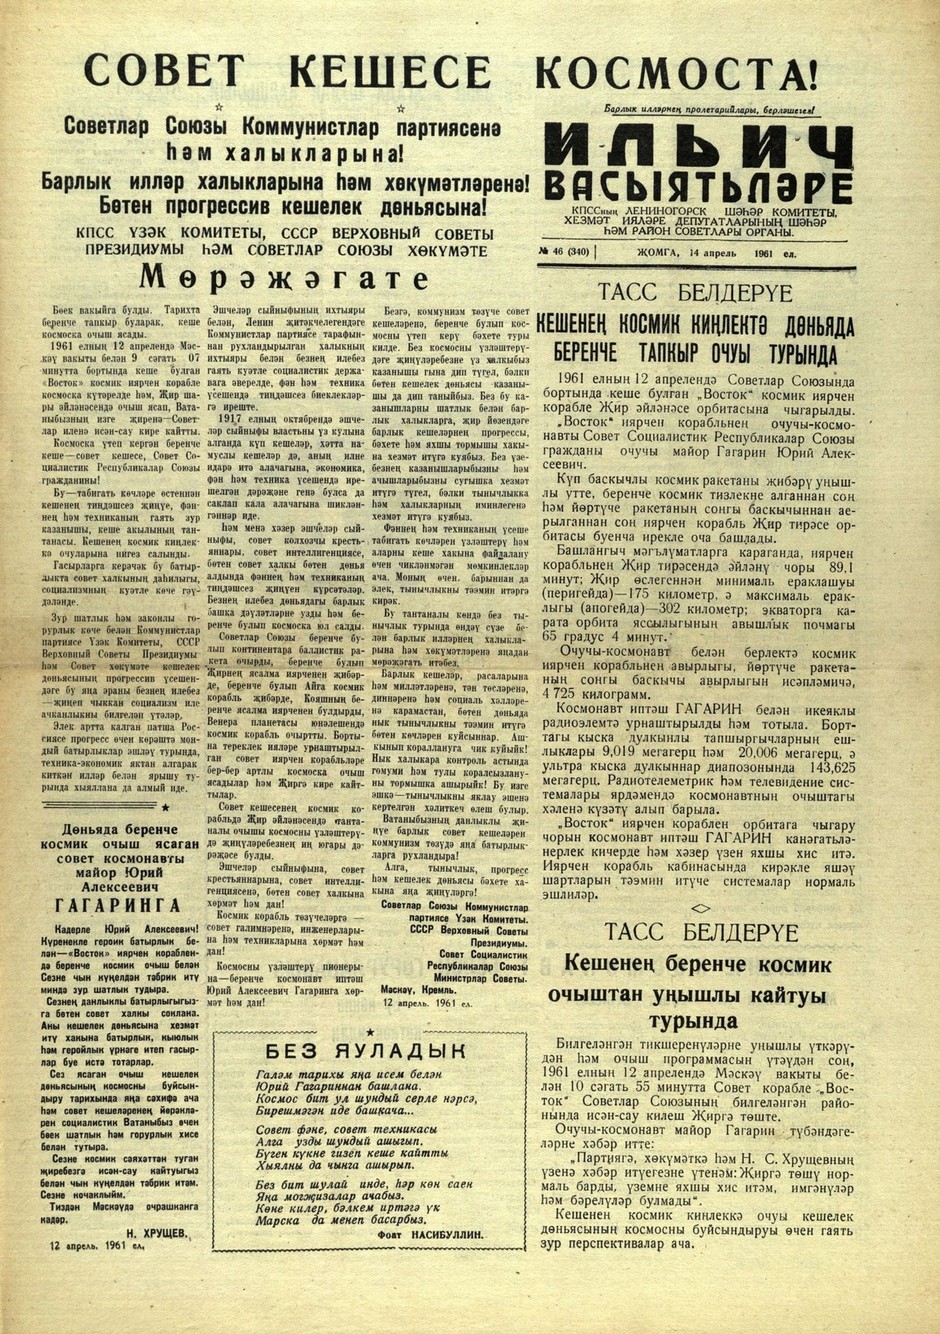 Tatarstan regional newspapers containing the information about the flight into space of Yuri Gagarin. April, 1961